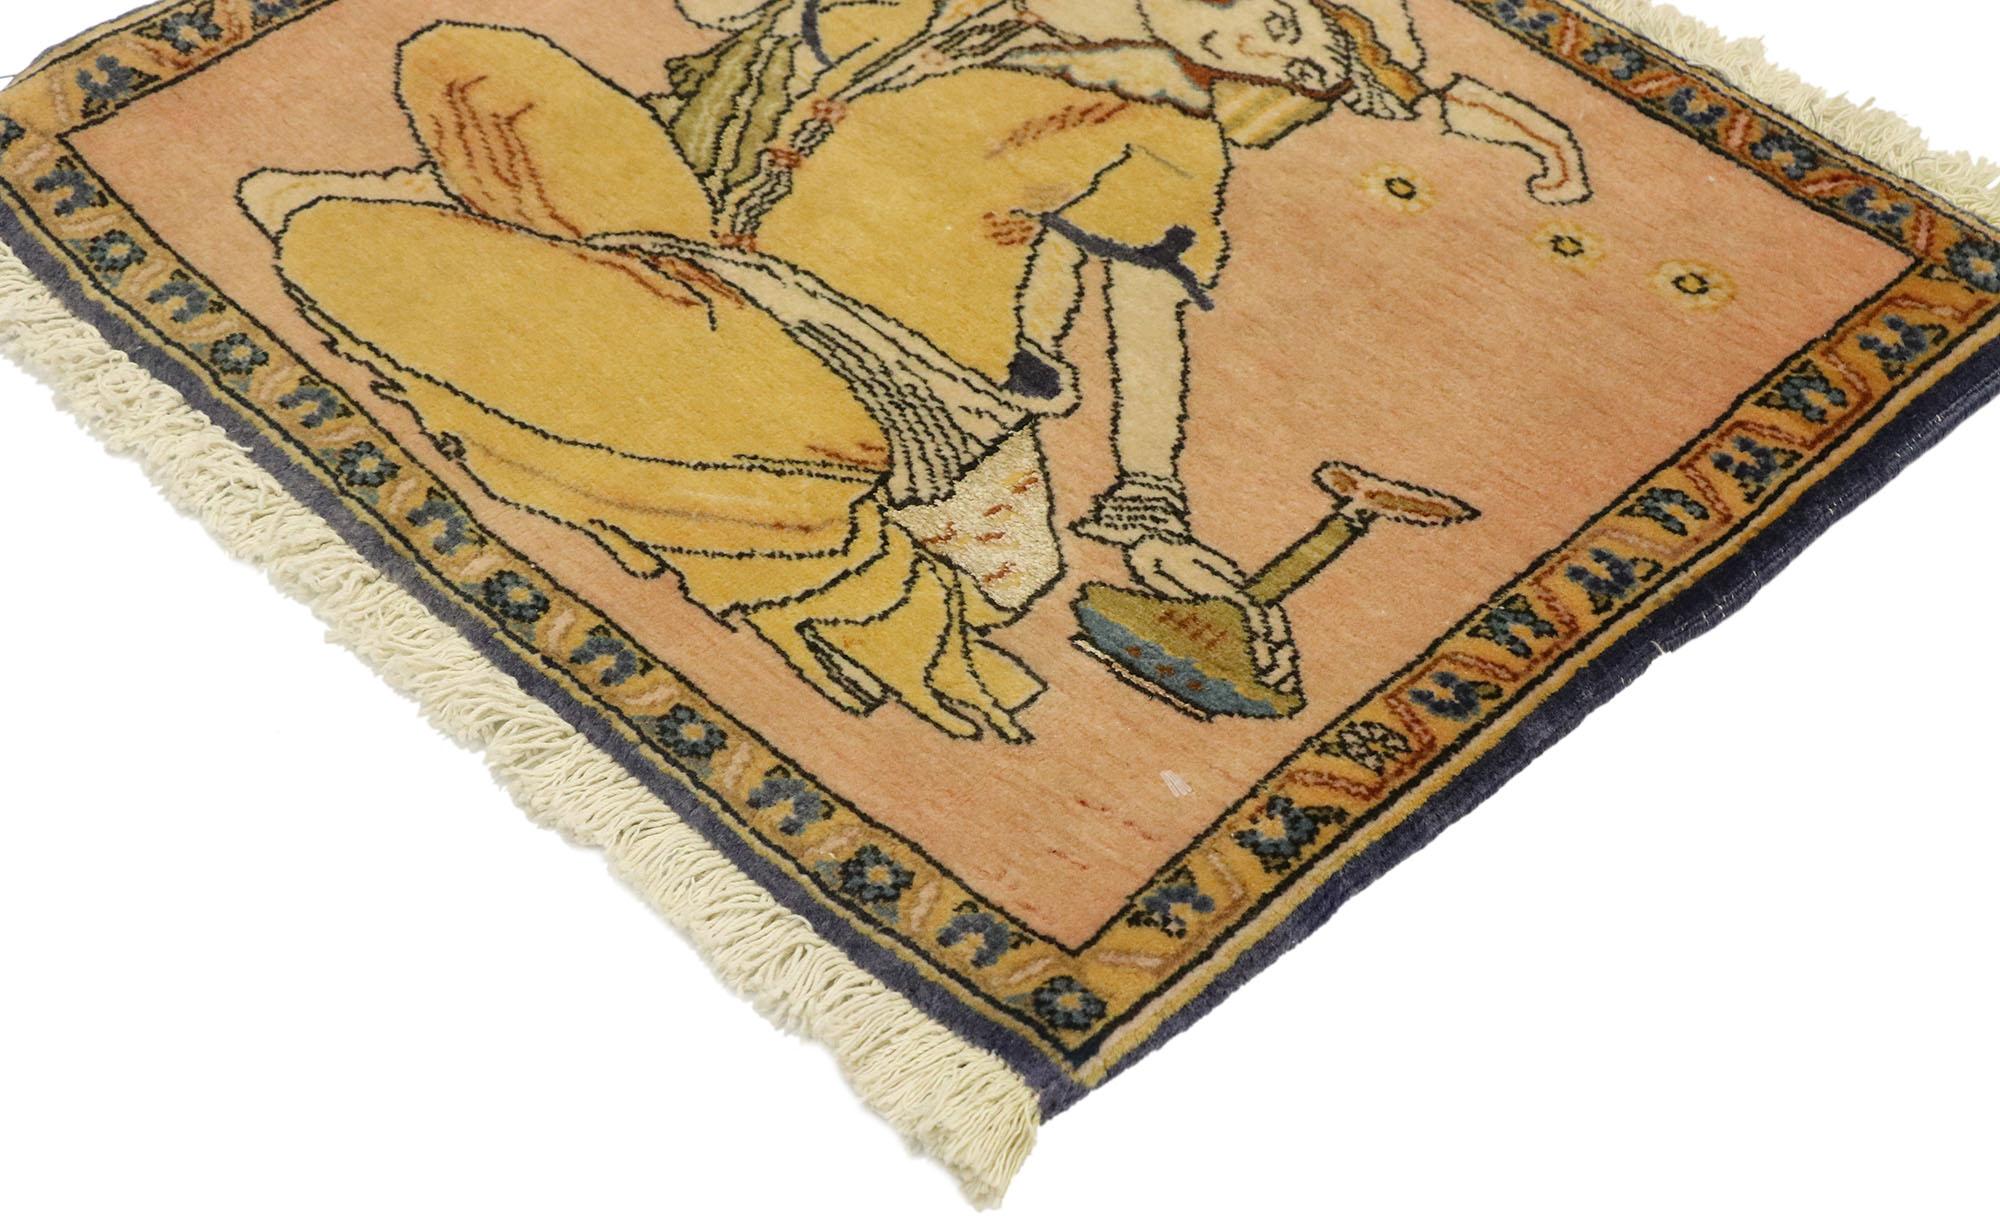 76199, vintage Persian Khamseh Pictorial rug with Dervish scene, Persian wall hanging. Ancient Persia boasts the true origin of viticulture and wine drinking as celebrated in this hand knotted wool vintage Persian Khamseh pictorial rug. Tender and